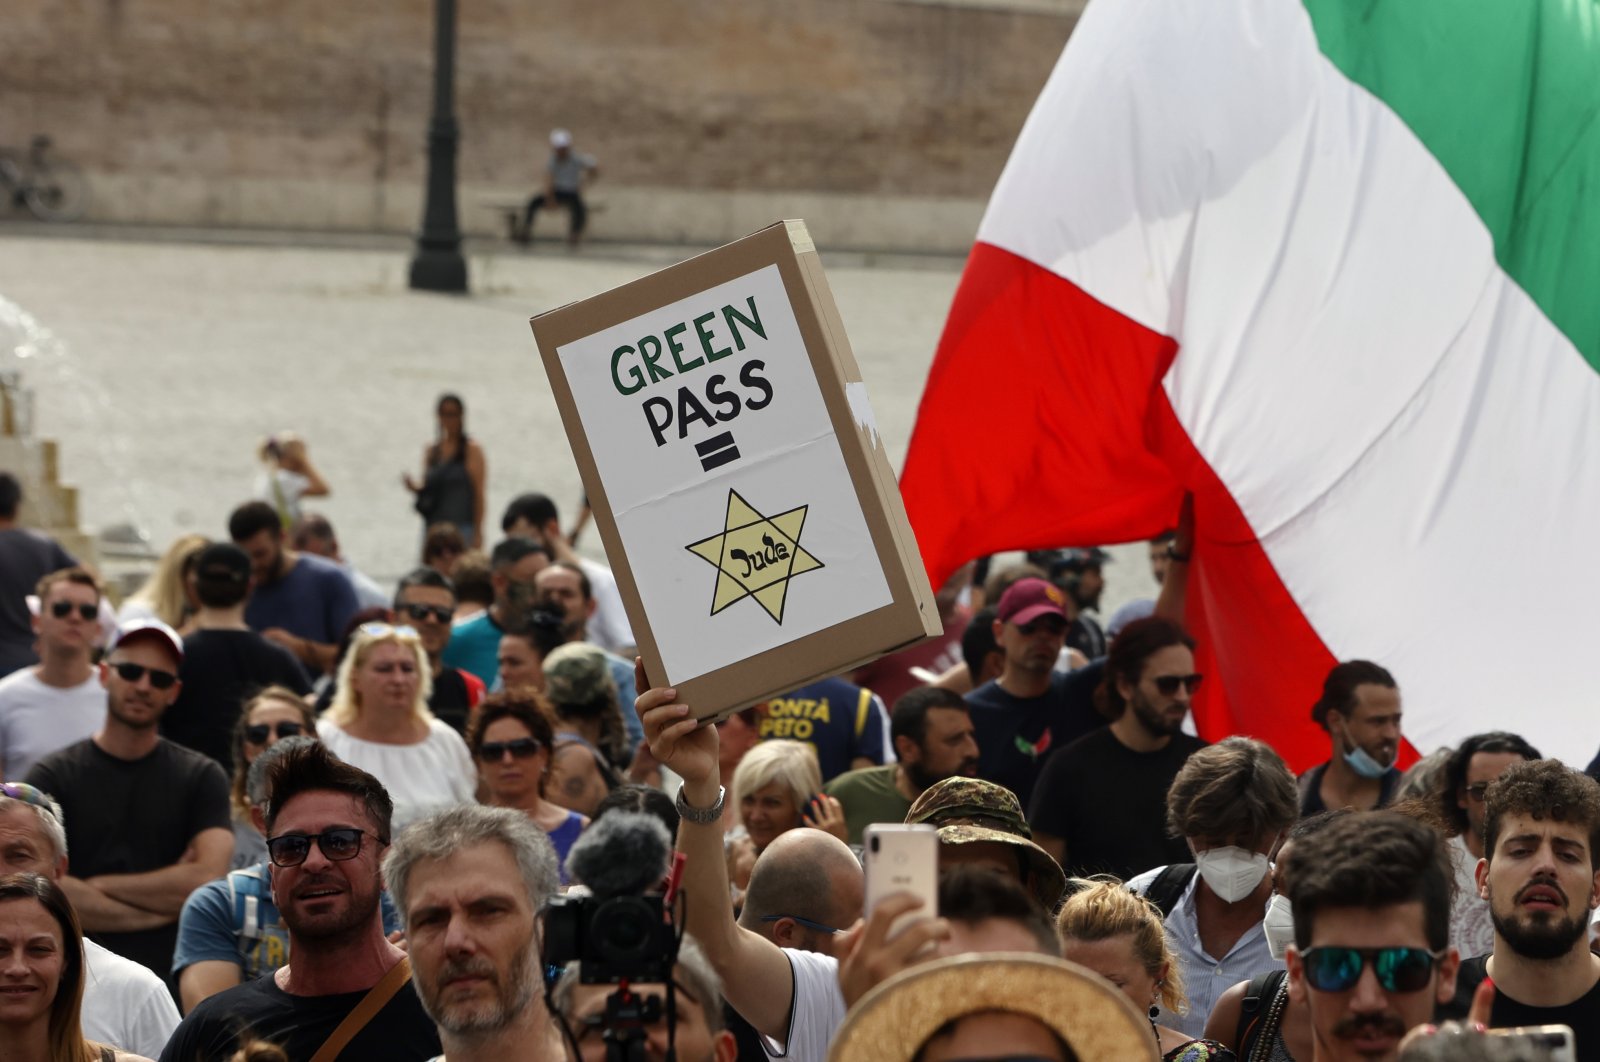 People gather to protest against the COVID-19 vaccination pass in Rome. Protesters in Italy and in France have been wearing yellow Stars of David, like the ones Nazis required Jews to wear to identify themselves during the Holocaust, July 27, 2021. (AP Photo)